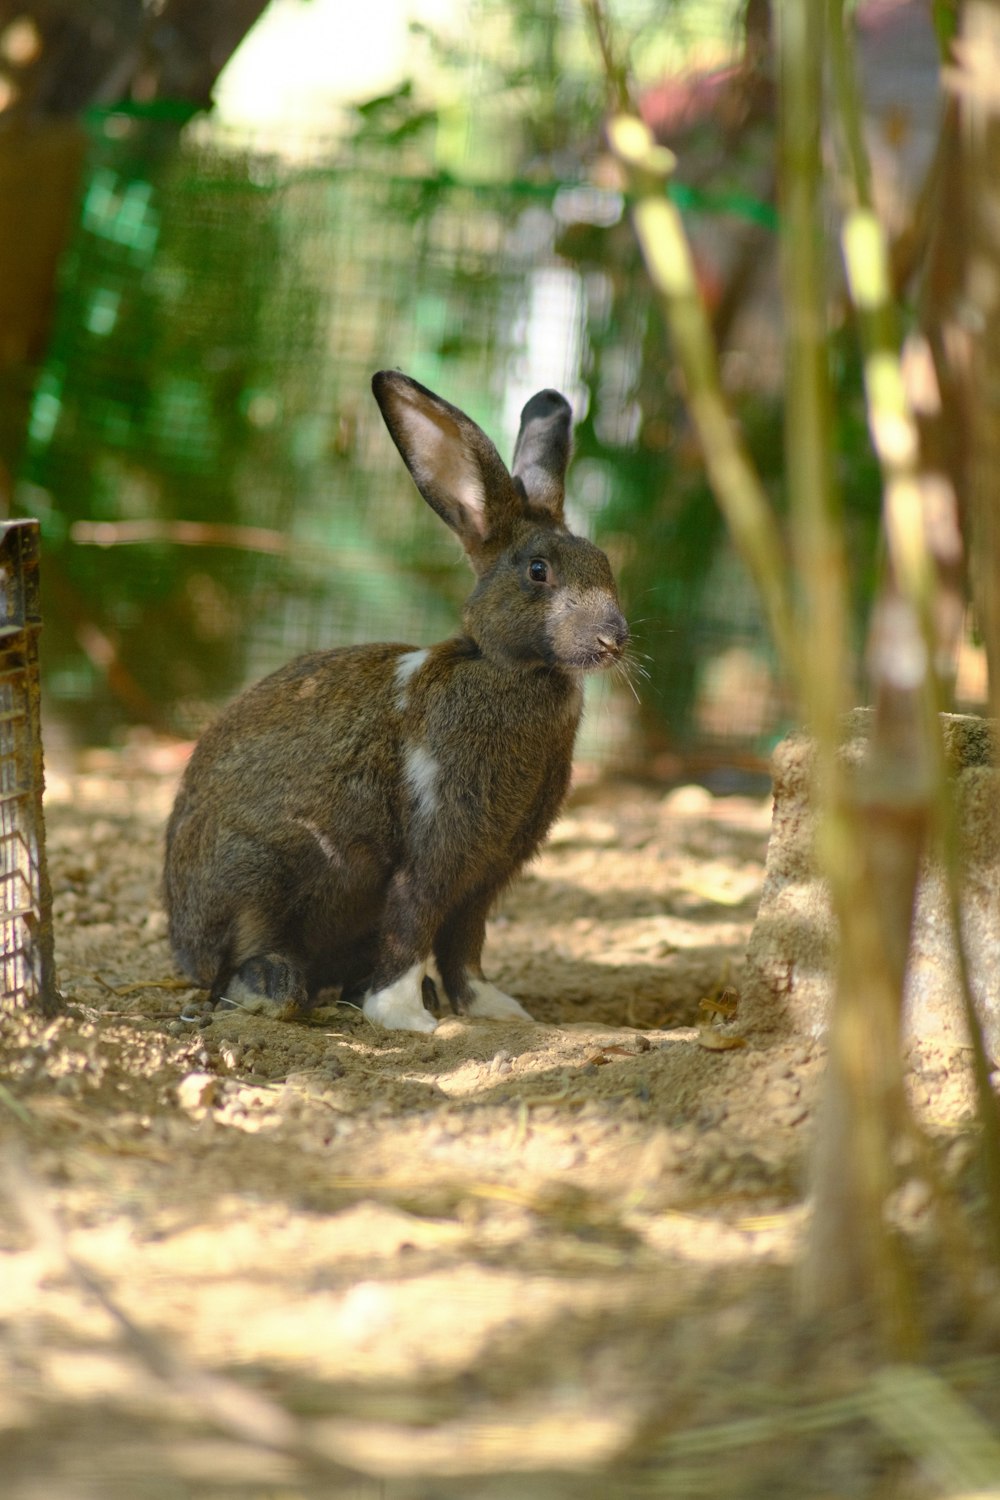 a rabbit sitting in the dirt next to a fence